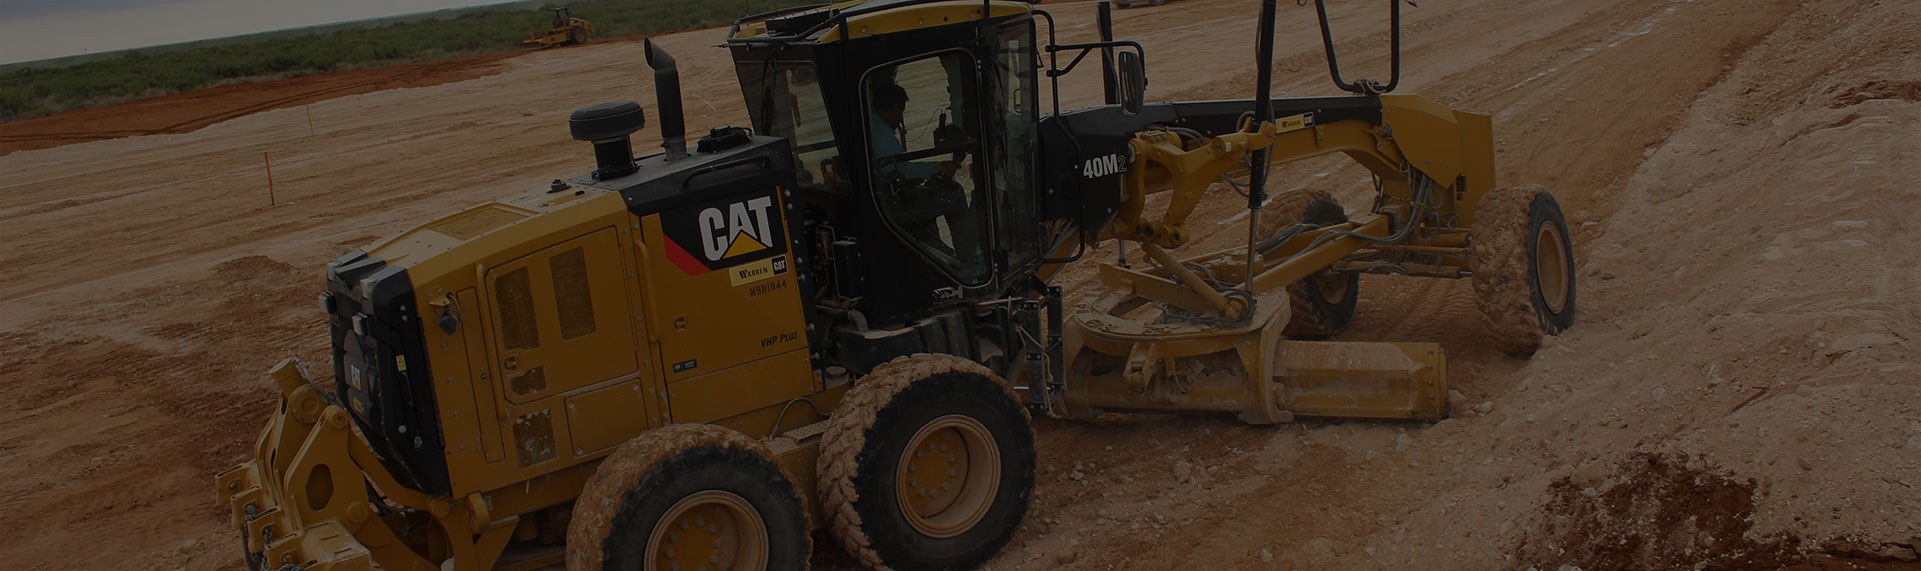 Large yellow caterpillar pulling heavy machinery in a dirt field.